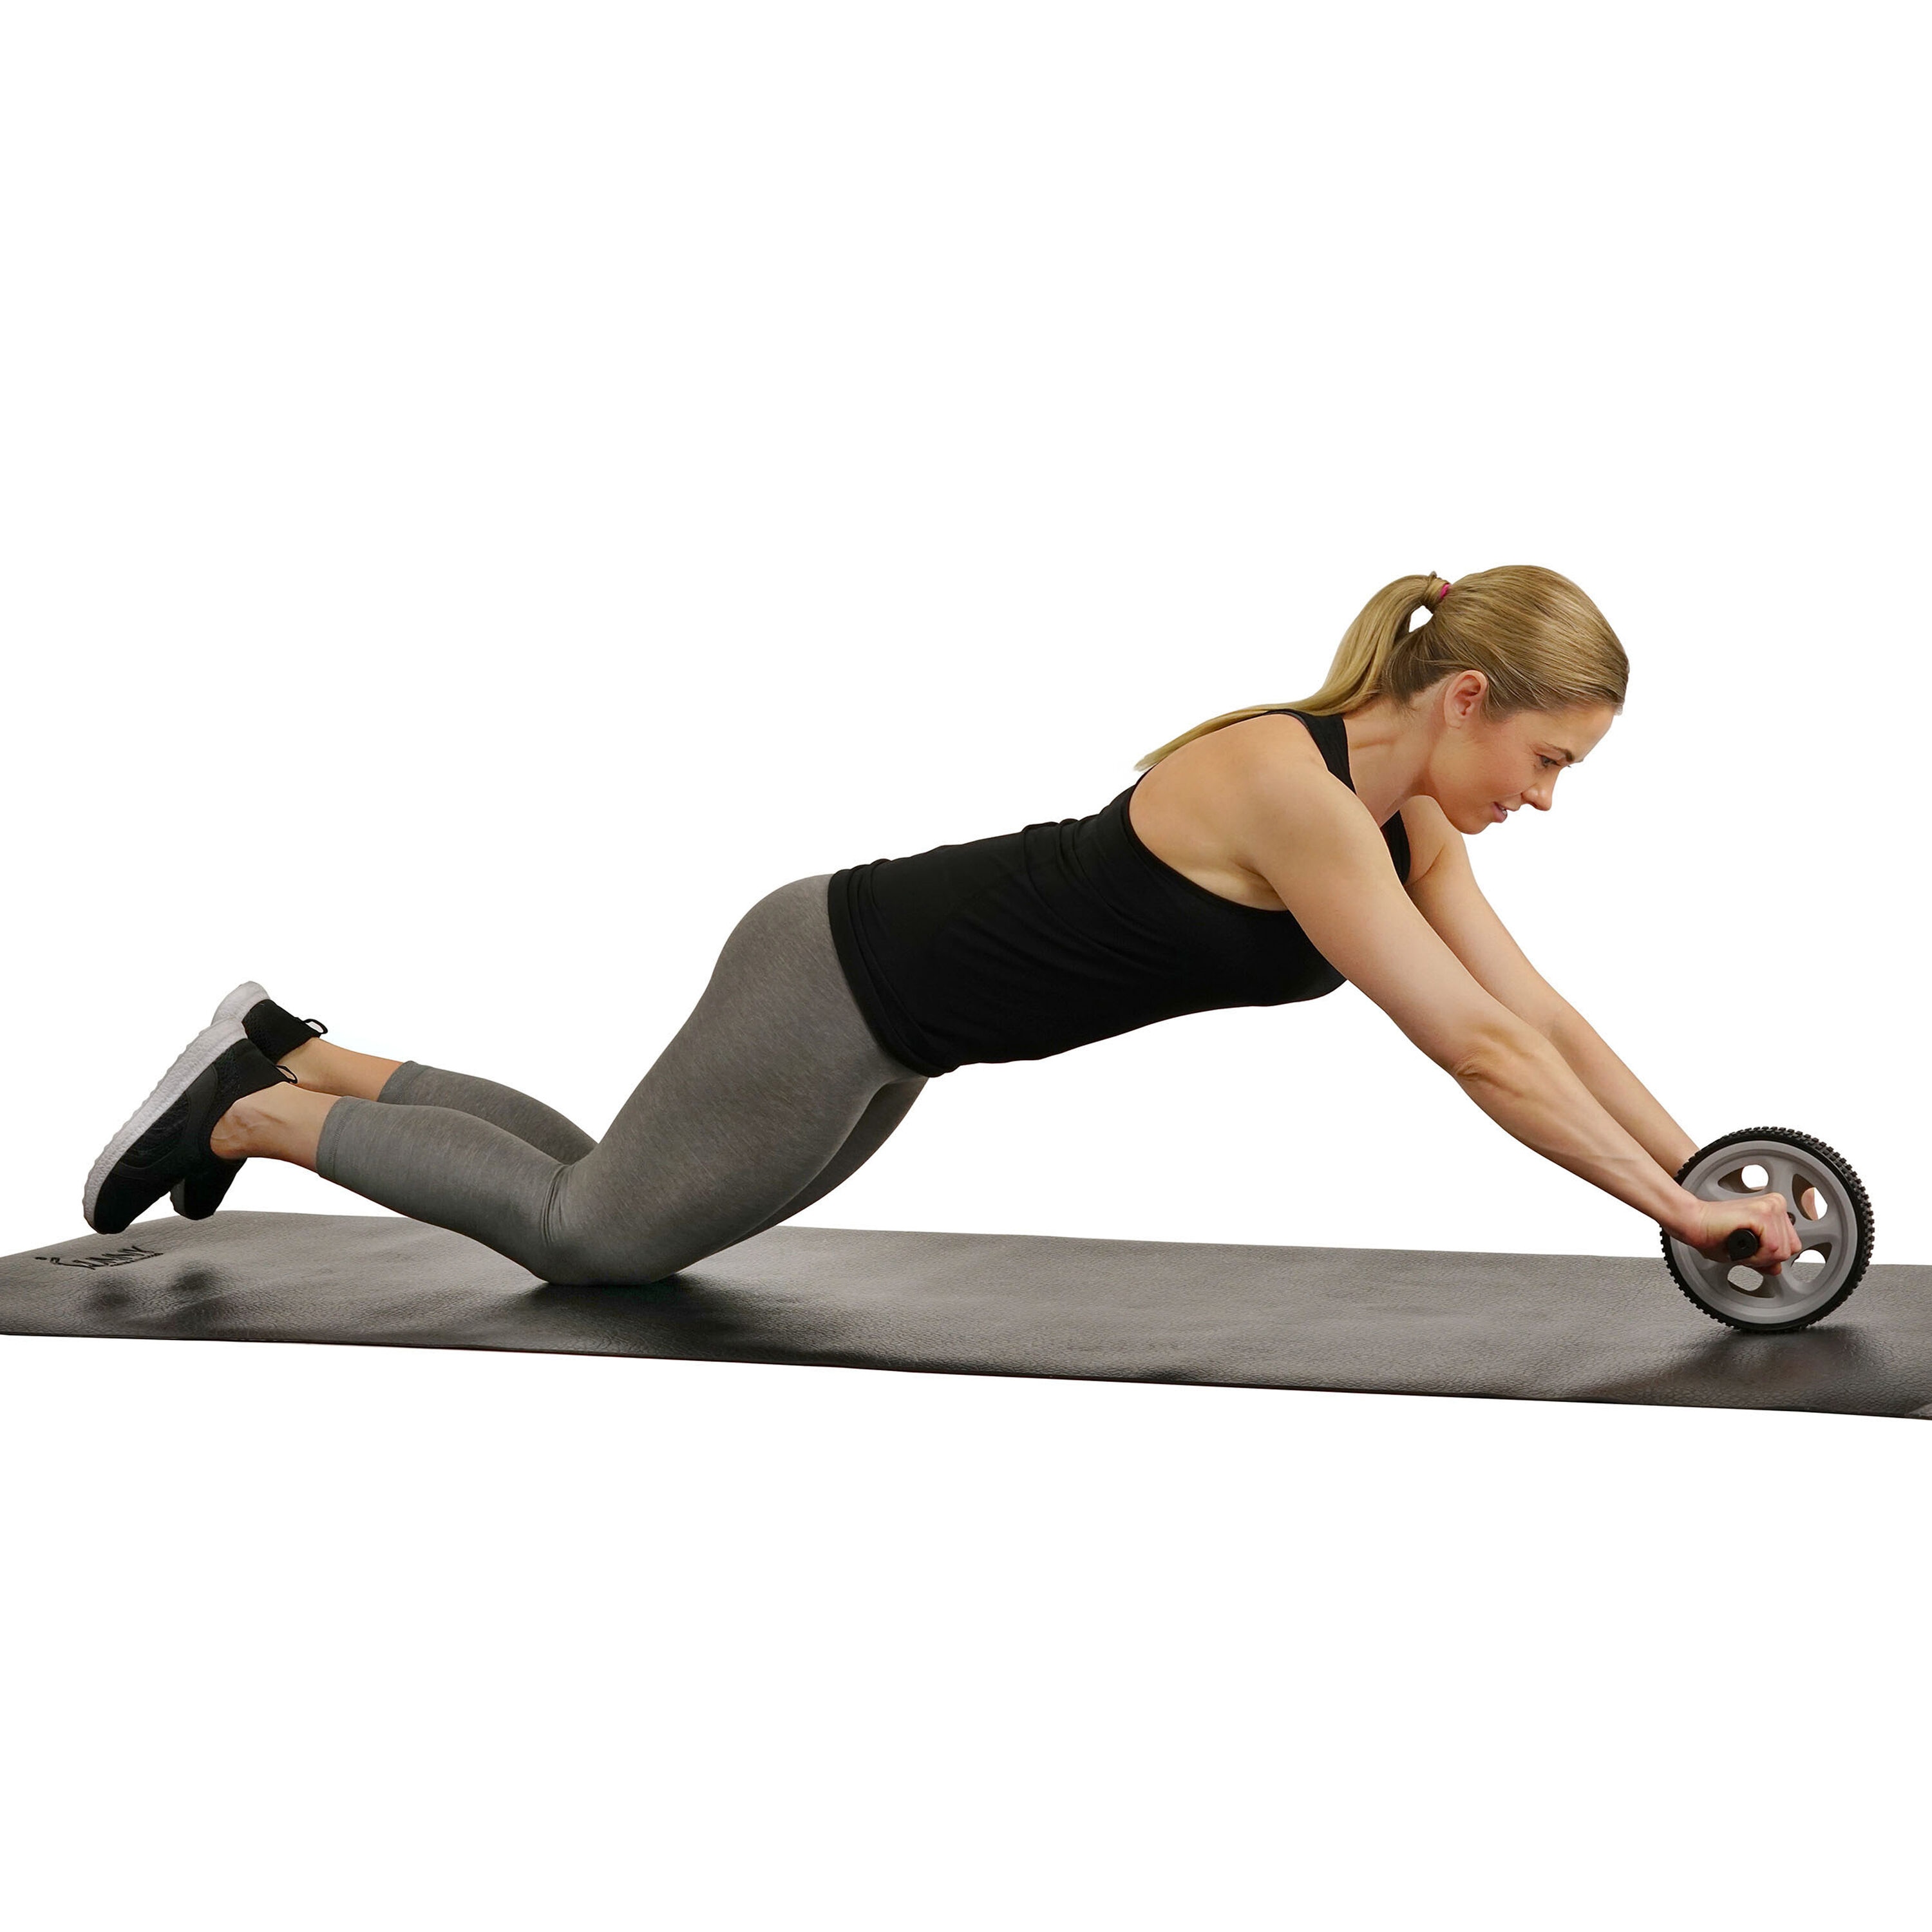 Sunny Health & Fitness Black Ab Roller Exercise Wheel - Sculpt Abs